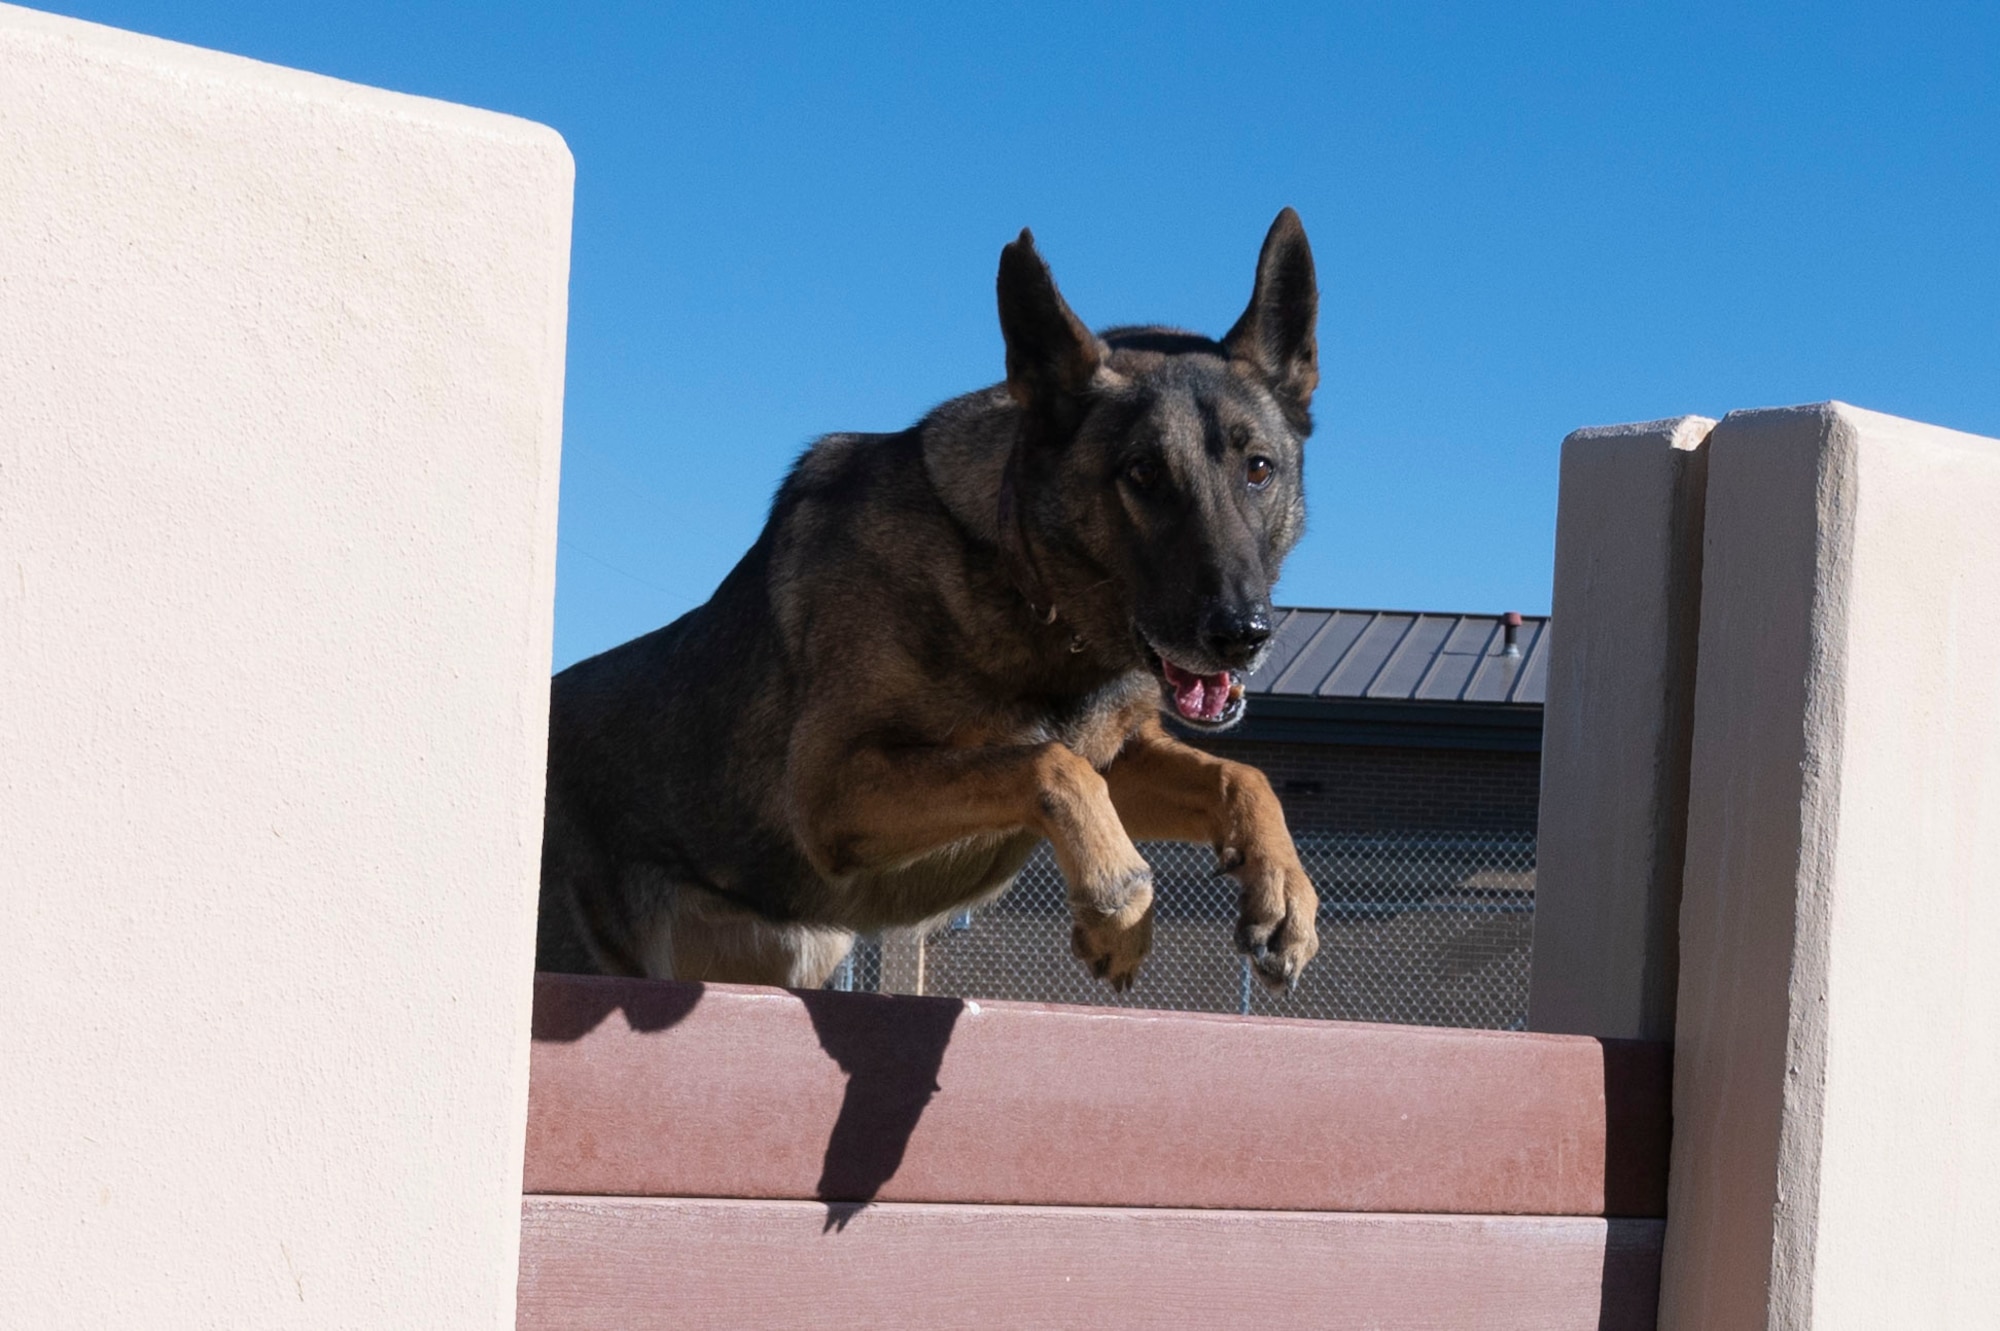 U.S. Air Force Staff Sgt. Charles Gaines, 47th Security Forces Squadron military working dog trainer, trains military working dog Toku, to jump over a hurdle at the 47th Security Forces Squadron military working dog training area at Laughlin Air Force Base, Texas, on Jan. 13, 2023. Military working dogs provide a variety of services, including the detection of explosives and drug searches, tracking of personnel and suspects, patrol of restricted areas, and protection of military installations. (U.S. Air Force photo by Airman 1st Class Kailee Reynolds)